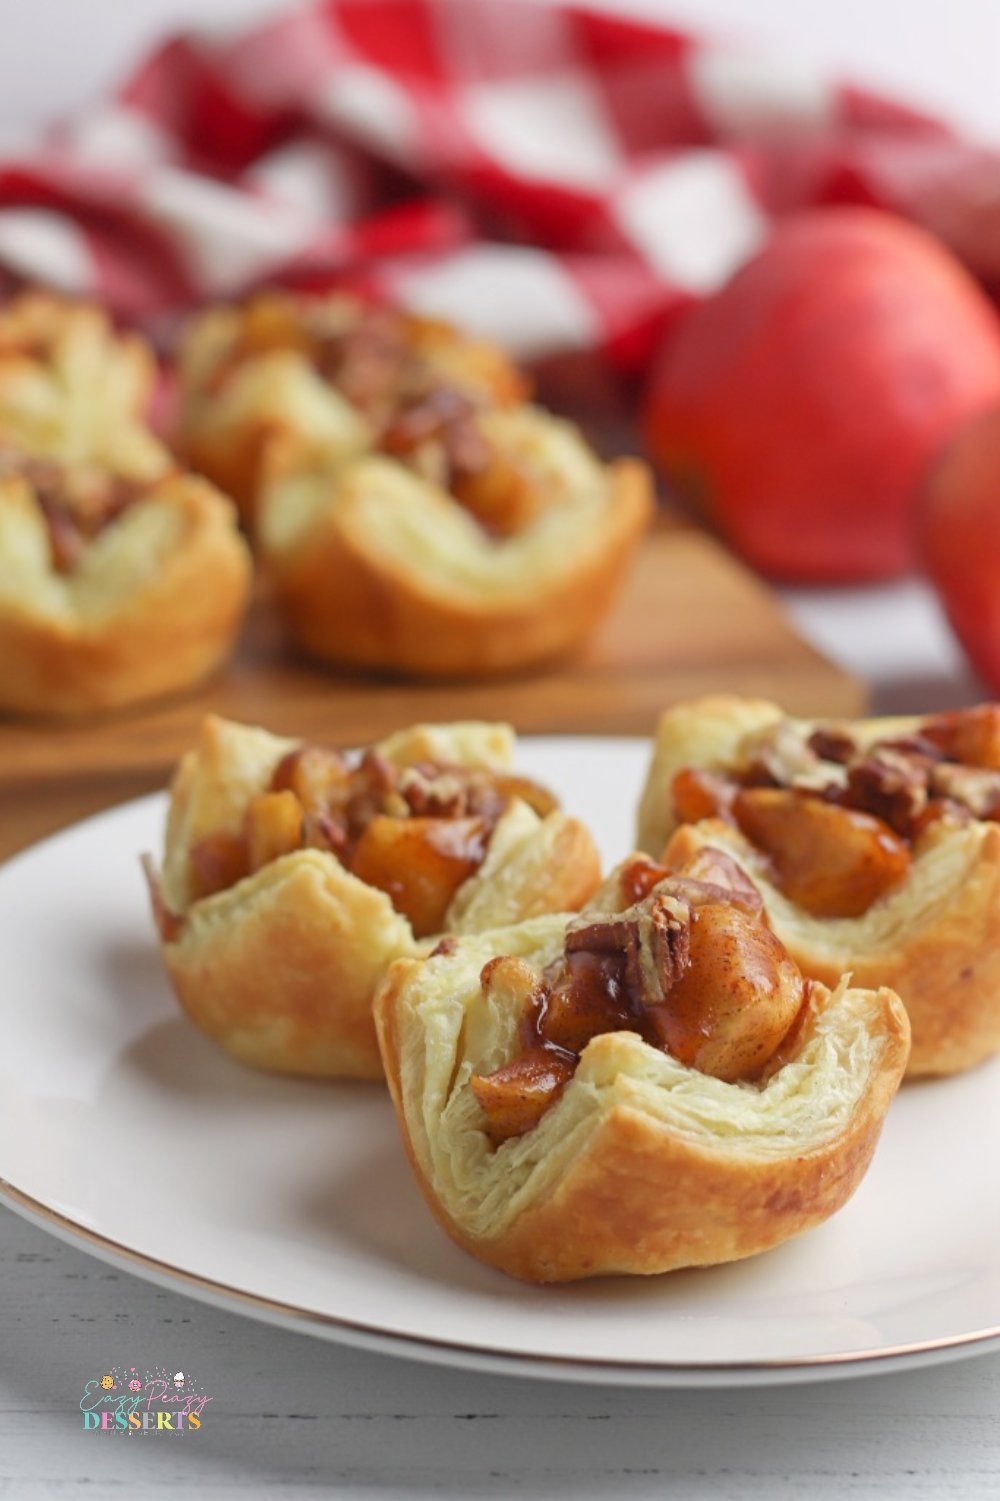 Apple pie cups made with puff pastry